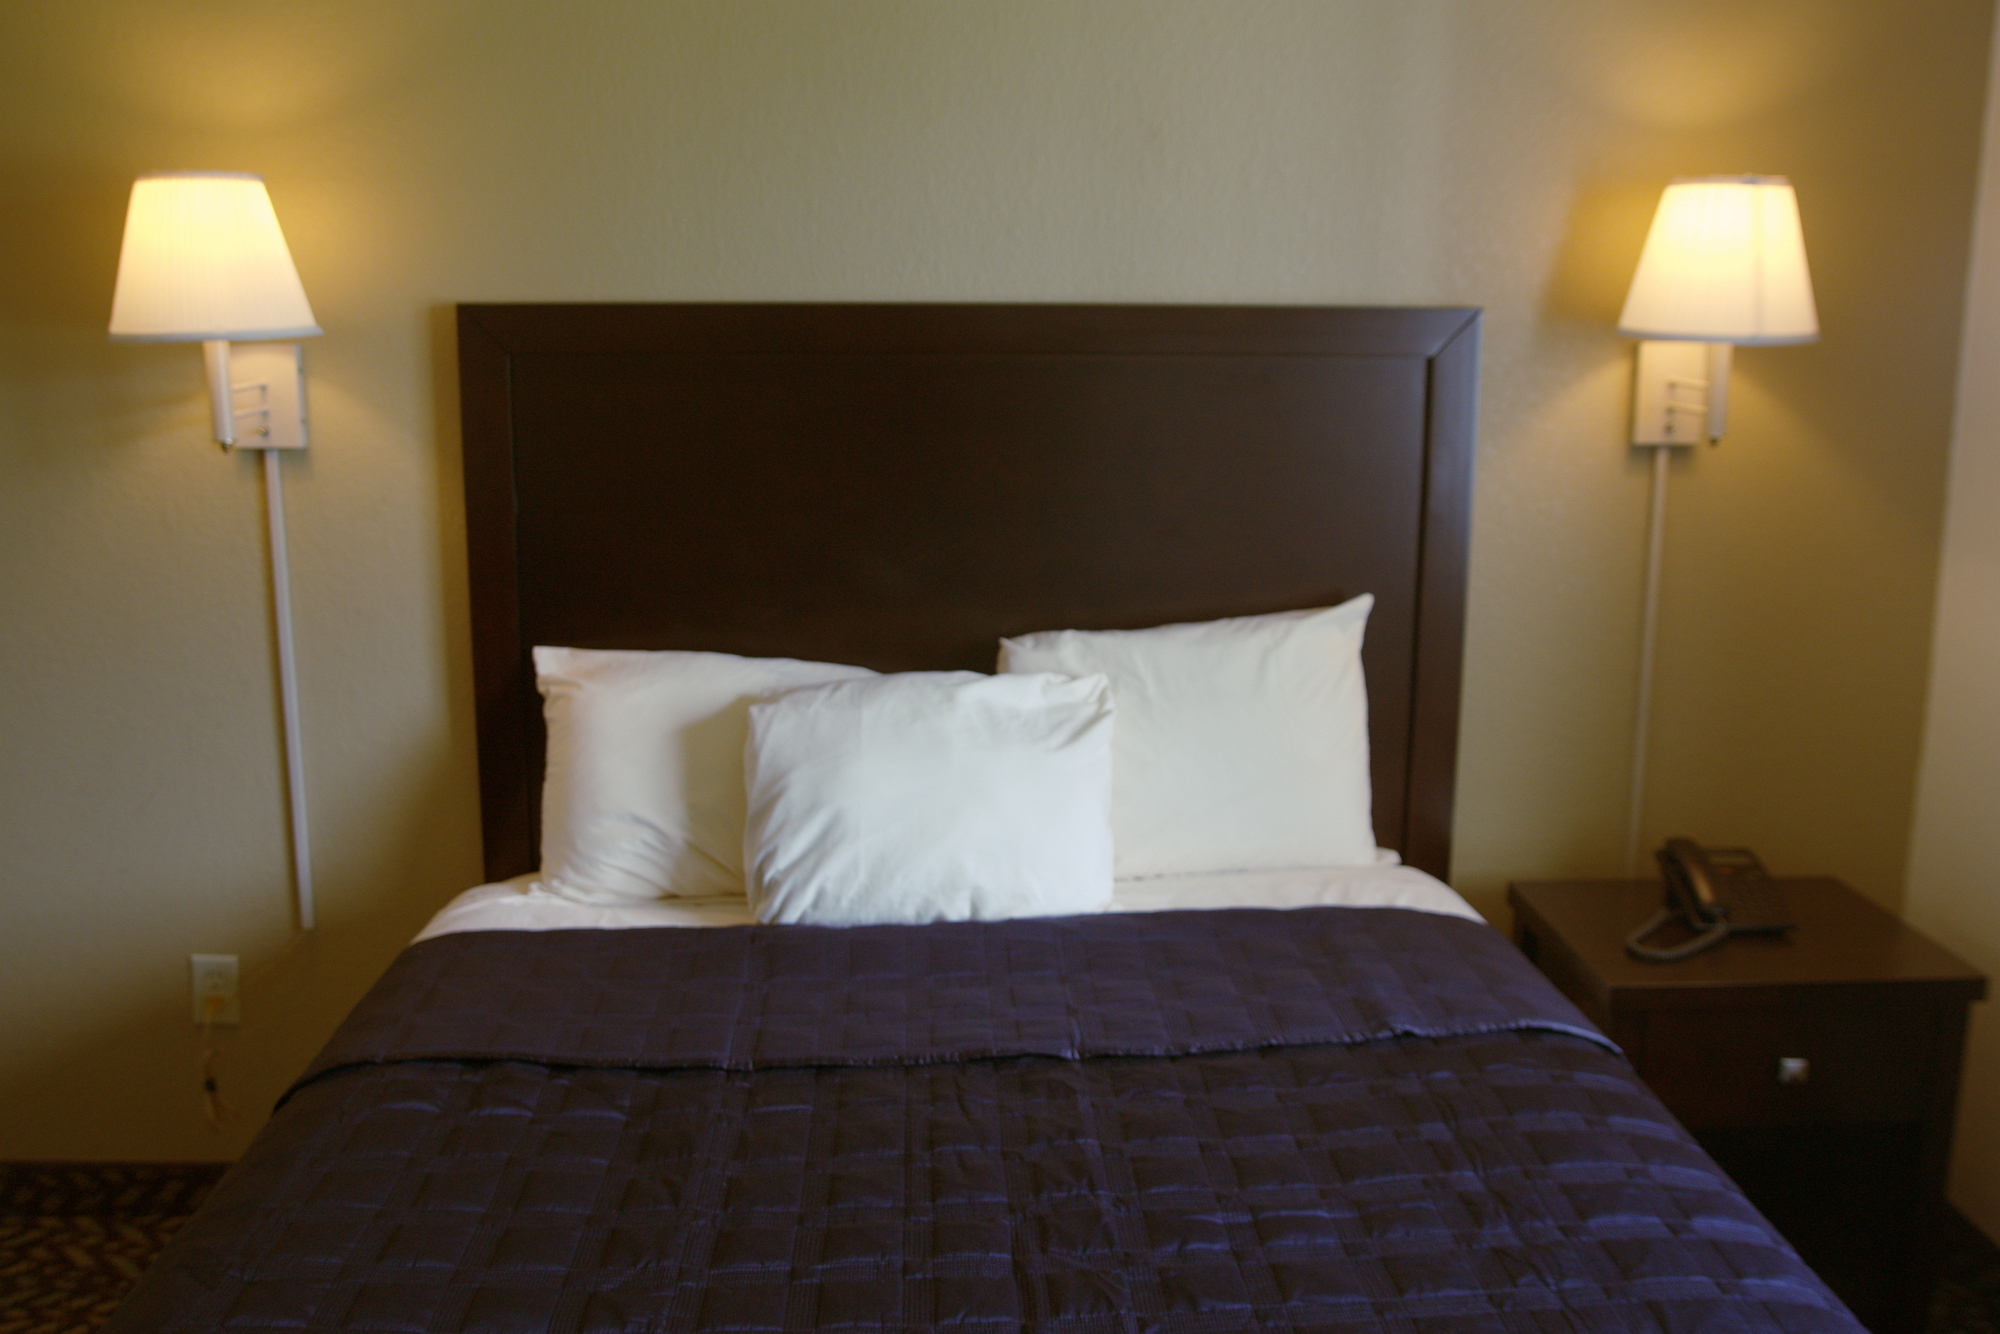 We offer studios and suites  in our extended stay hotel.